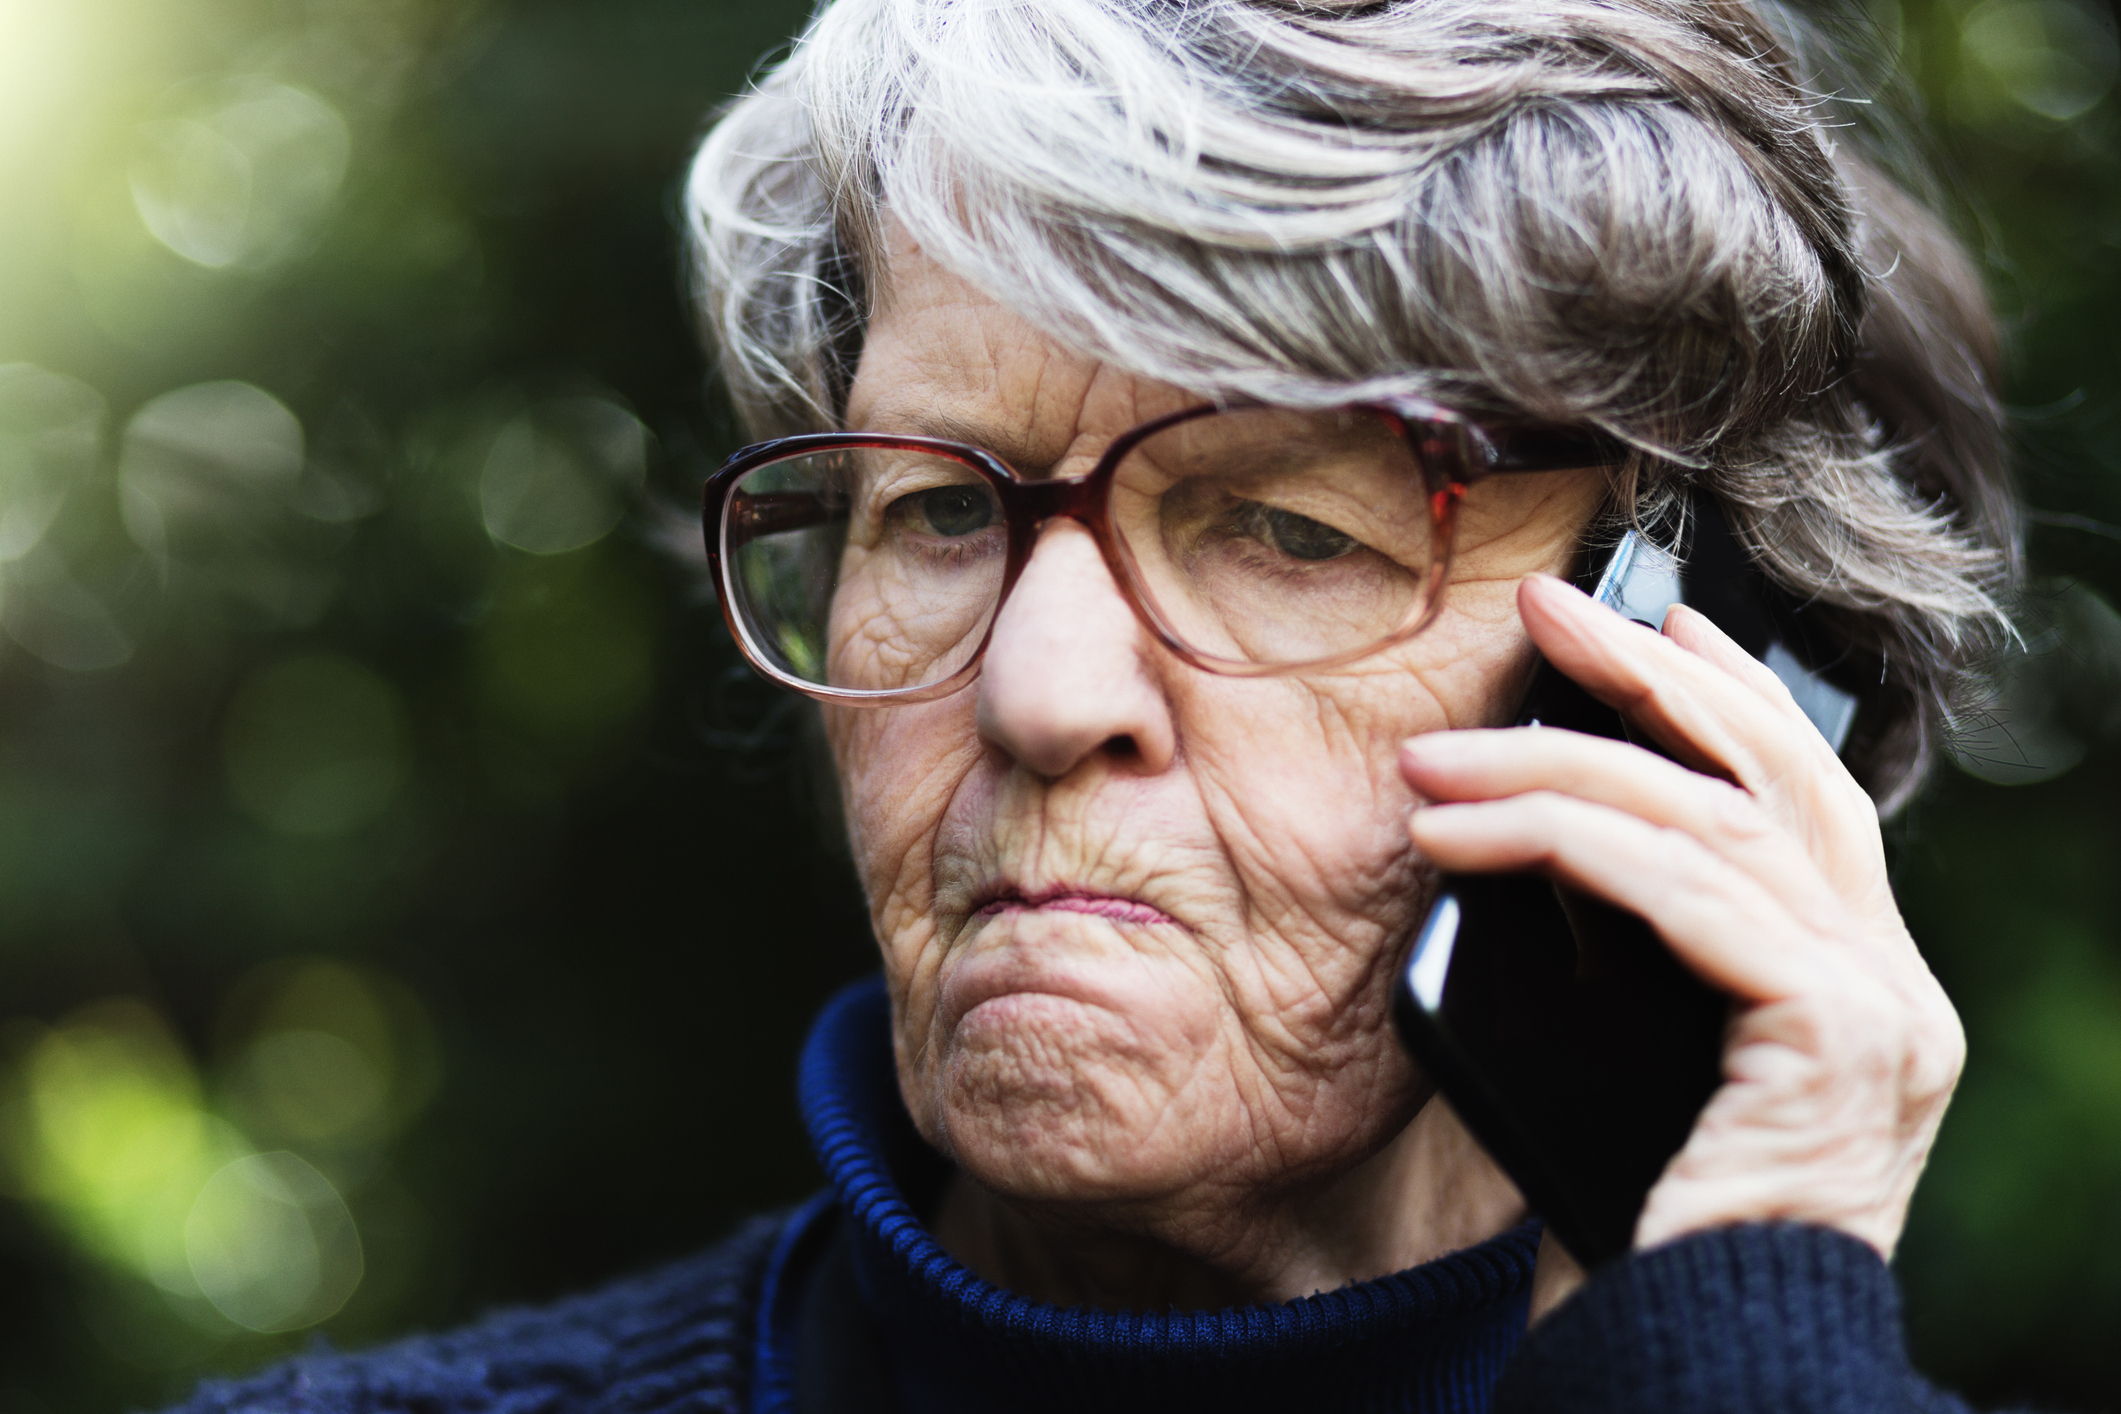 Elderly woman with glasses looks concerned while talking on a cell phone outdoors